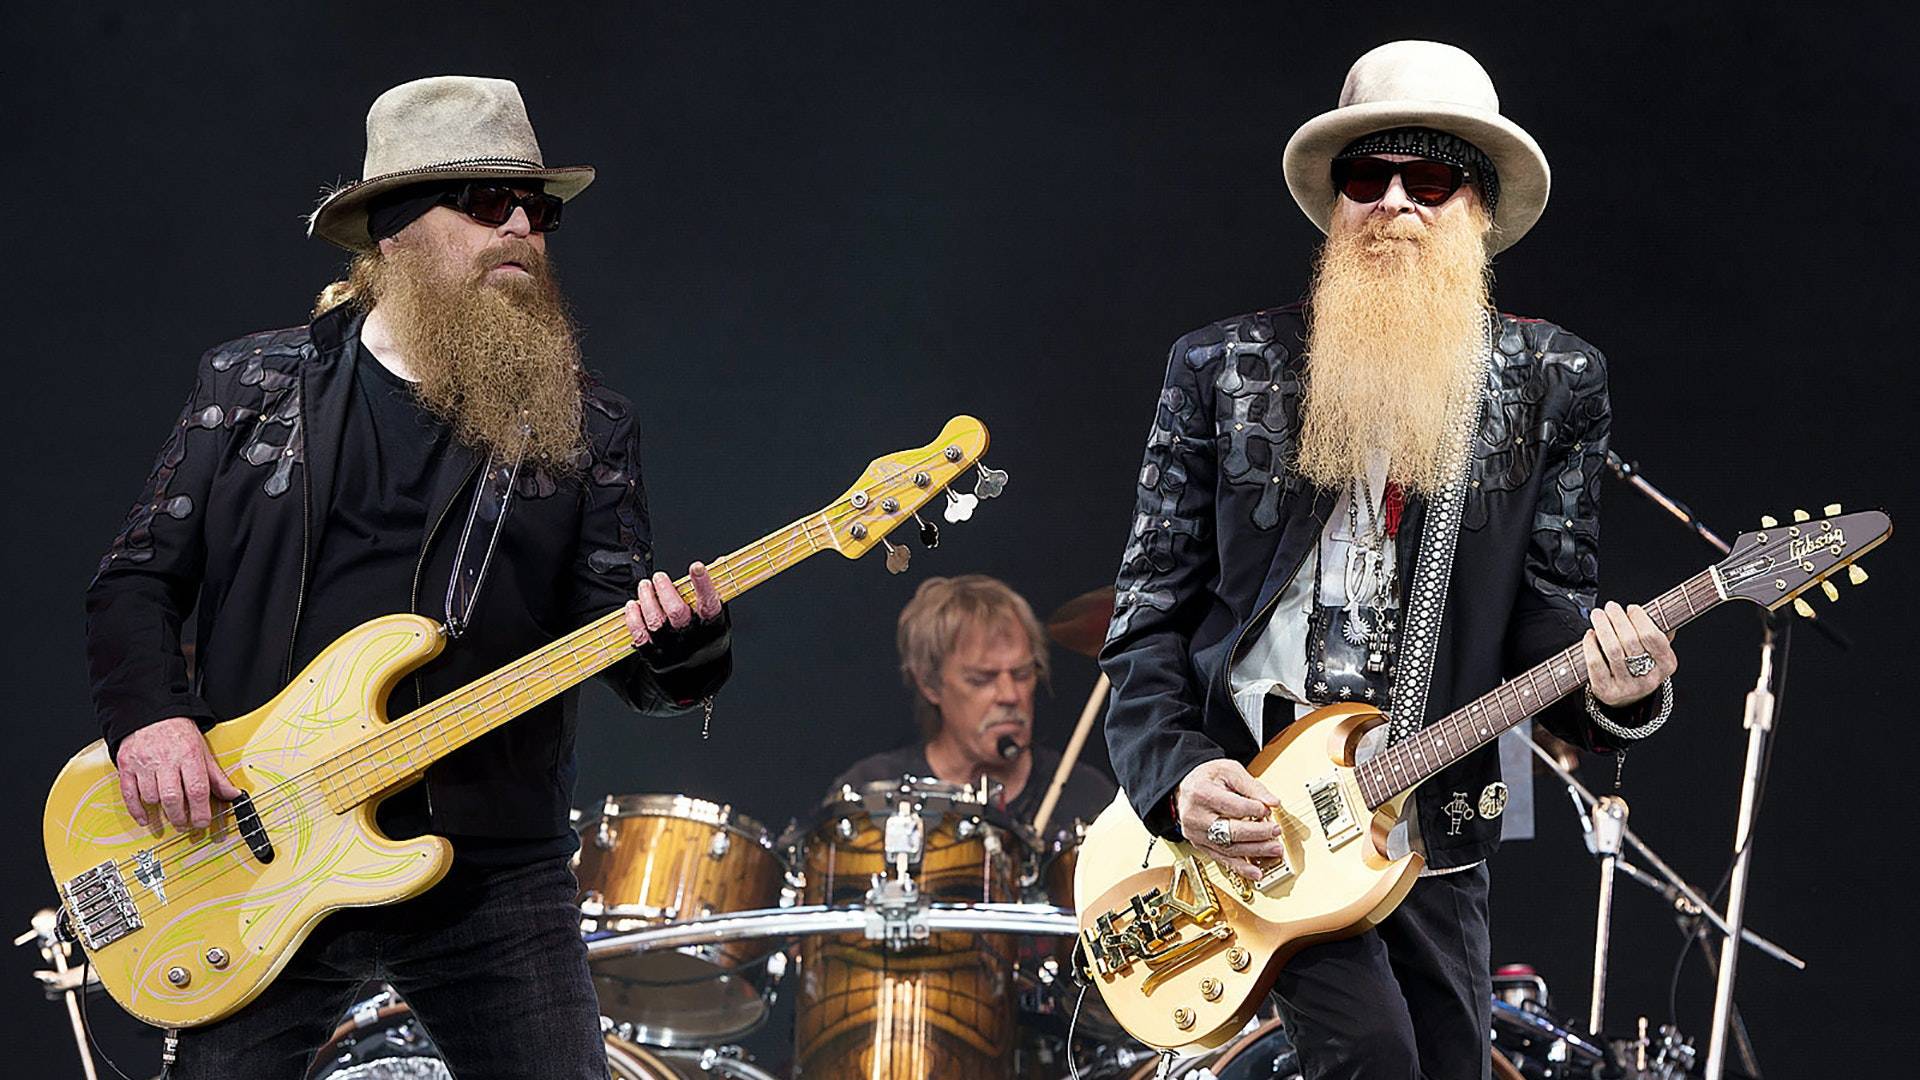 ZZ Tops the famous rock n roll legends use beard care products